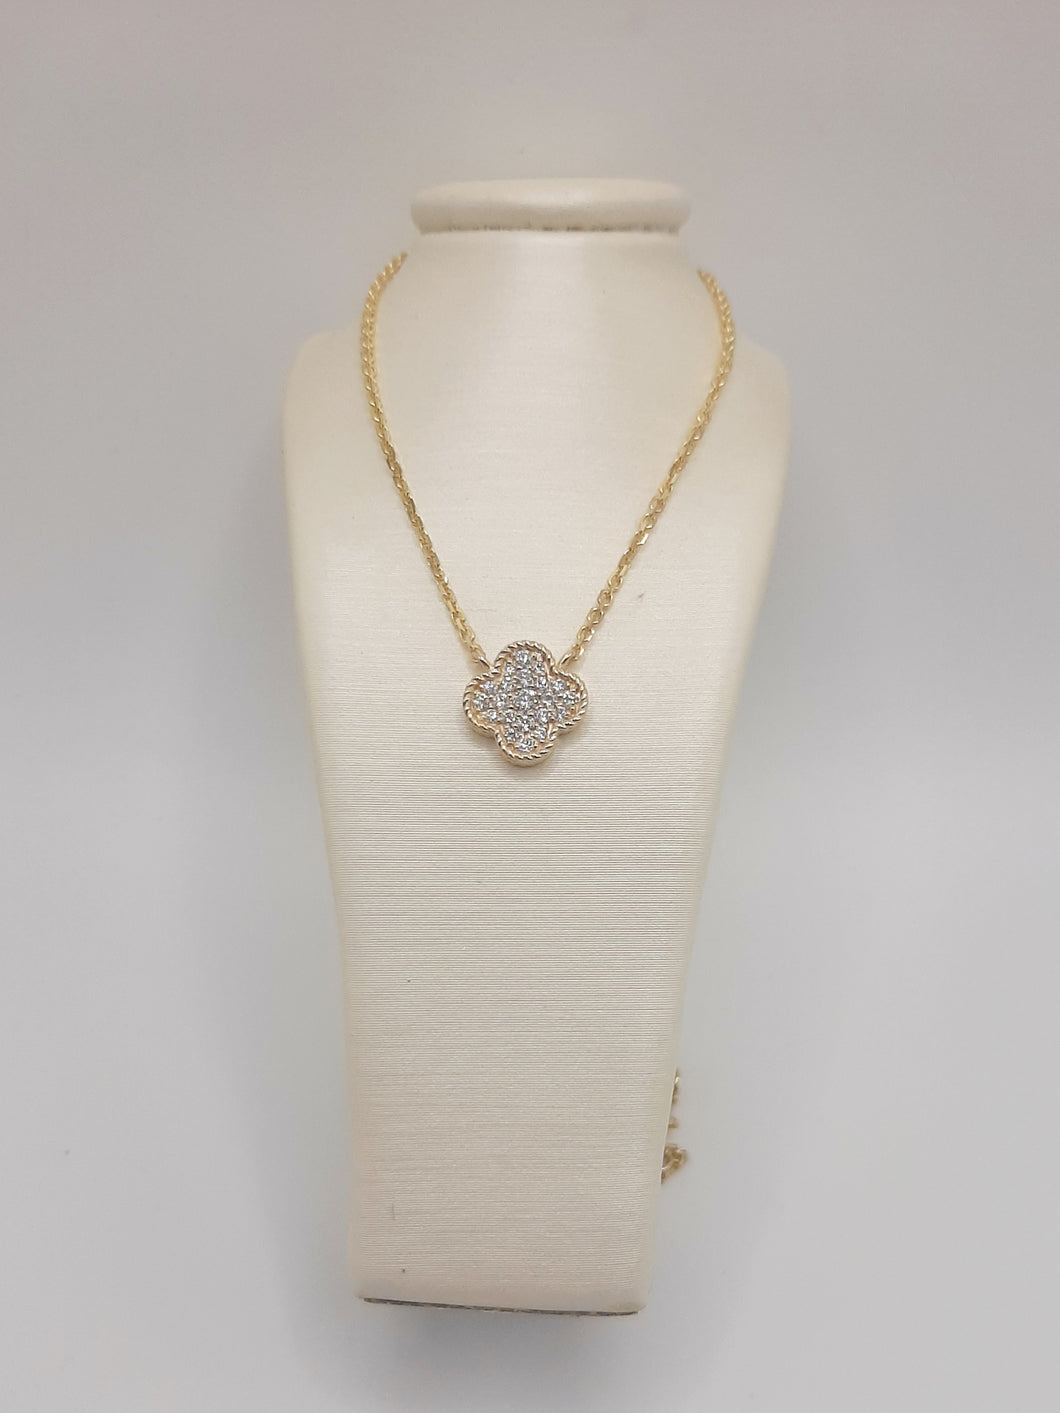 14Kt Yellow gold clover necklace